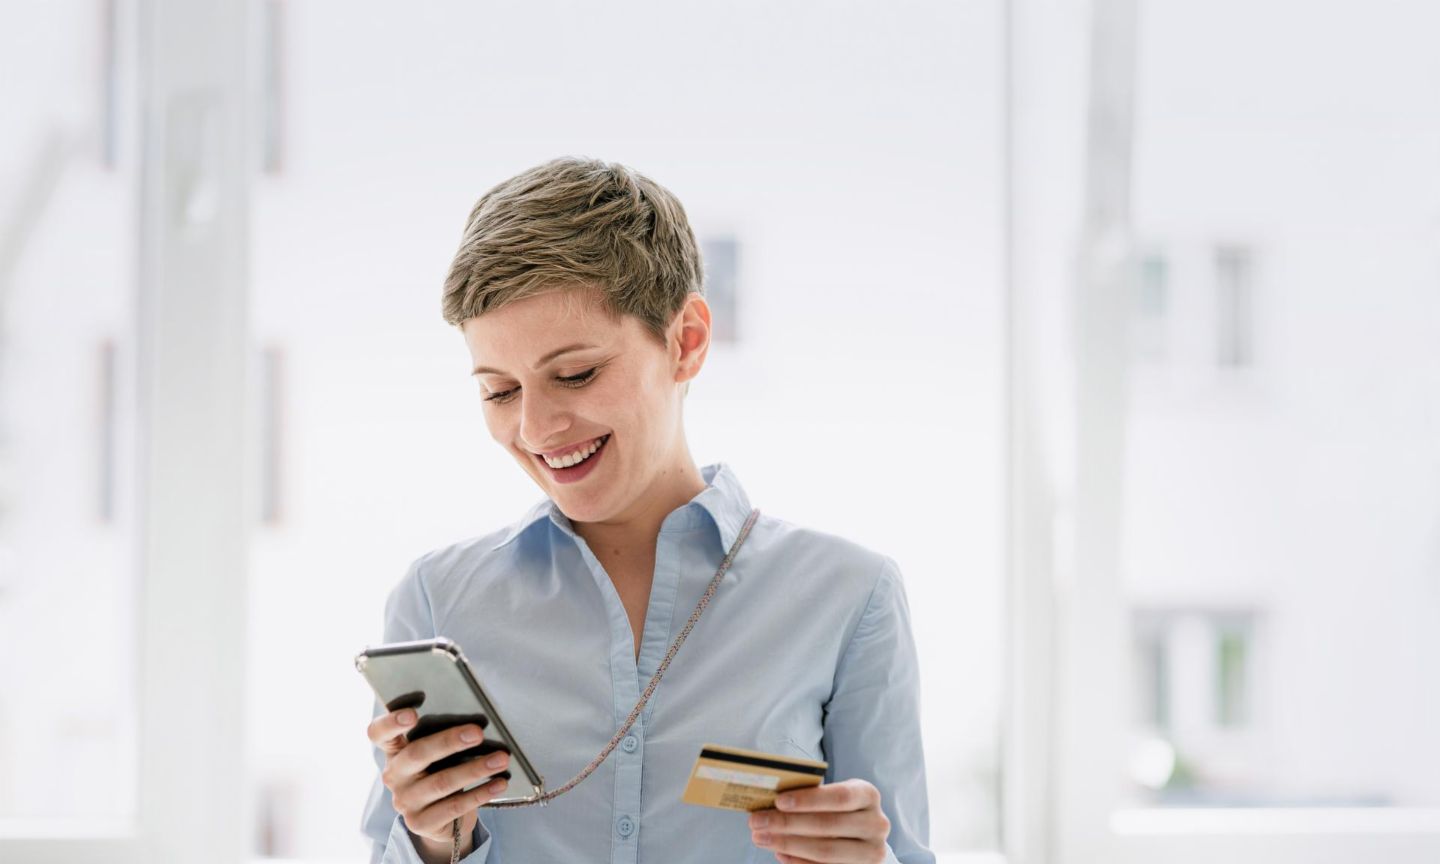 Woman with short hair looks at her mobile phone and has her credit card in the other hand. 